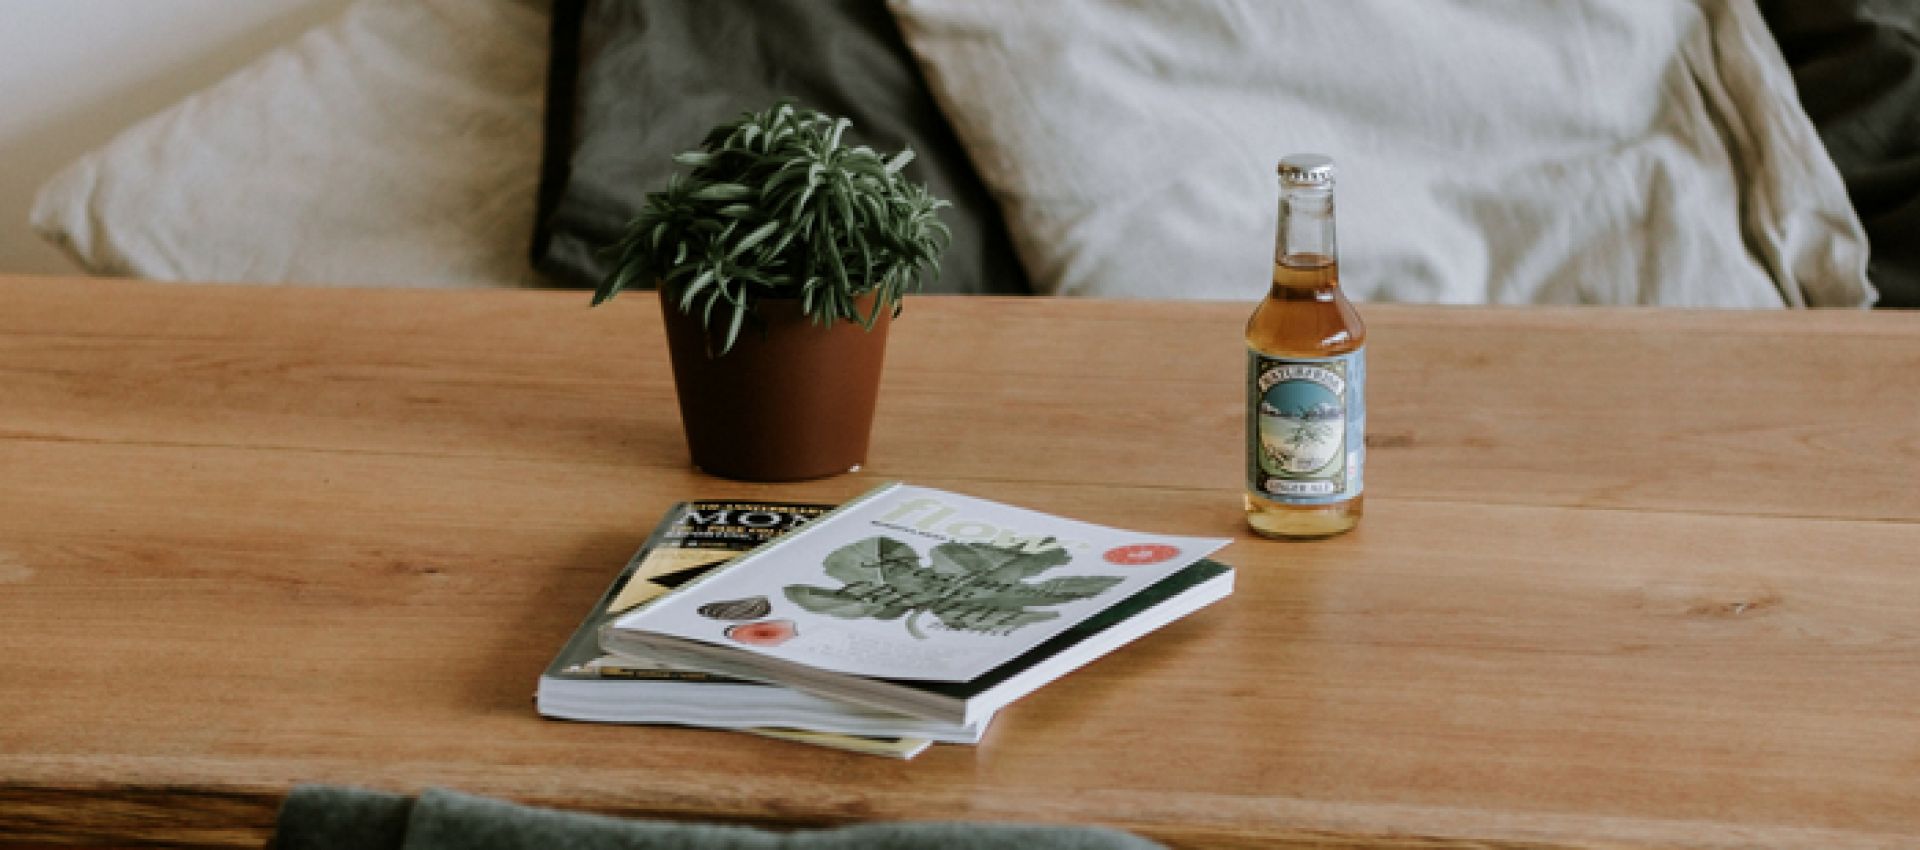 Photo for: How to get your beer featured by leading magazines and blogs